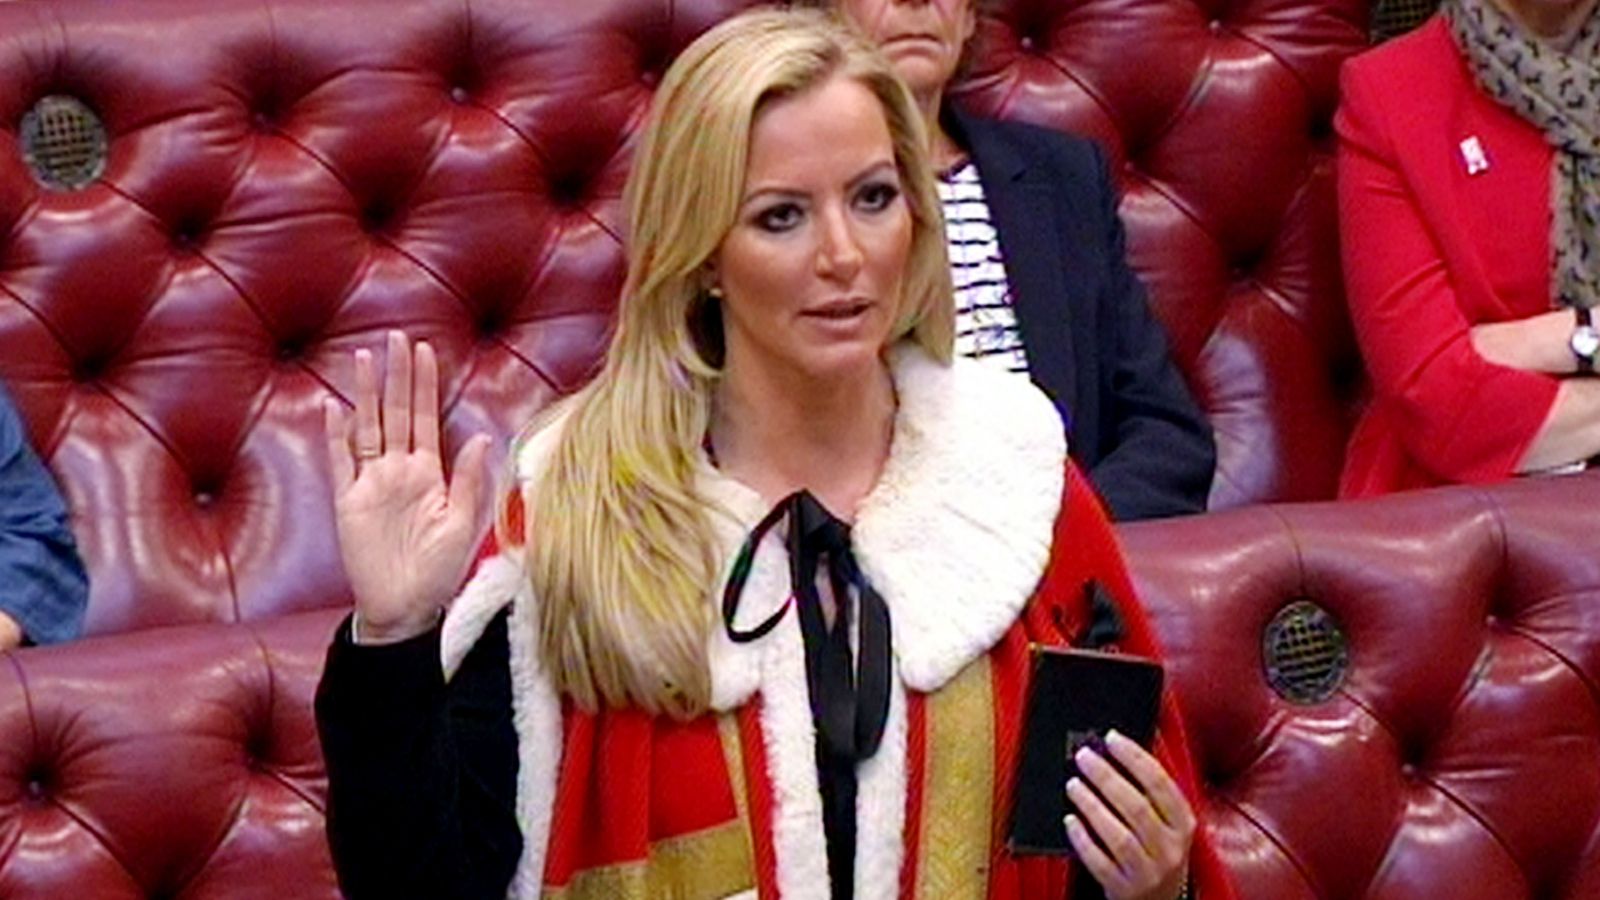 Government starts legal proceedings against firm allegedly linked to Baroness Michelle Mone at centre of PPE supply row